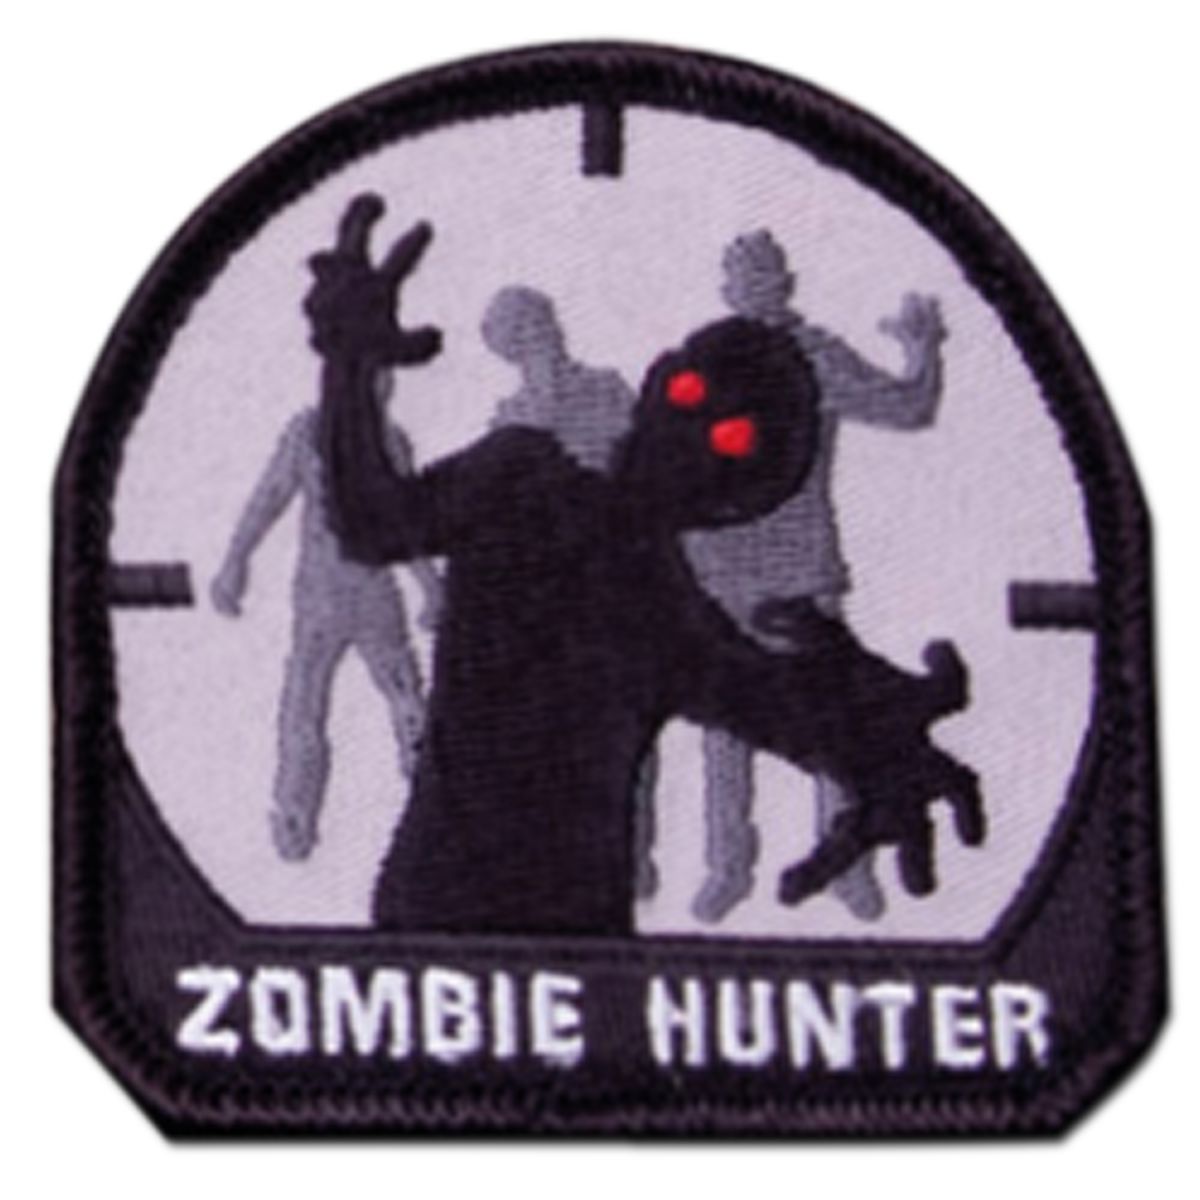 zombie hunter patch meaning